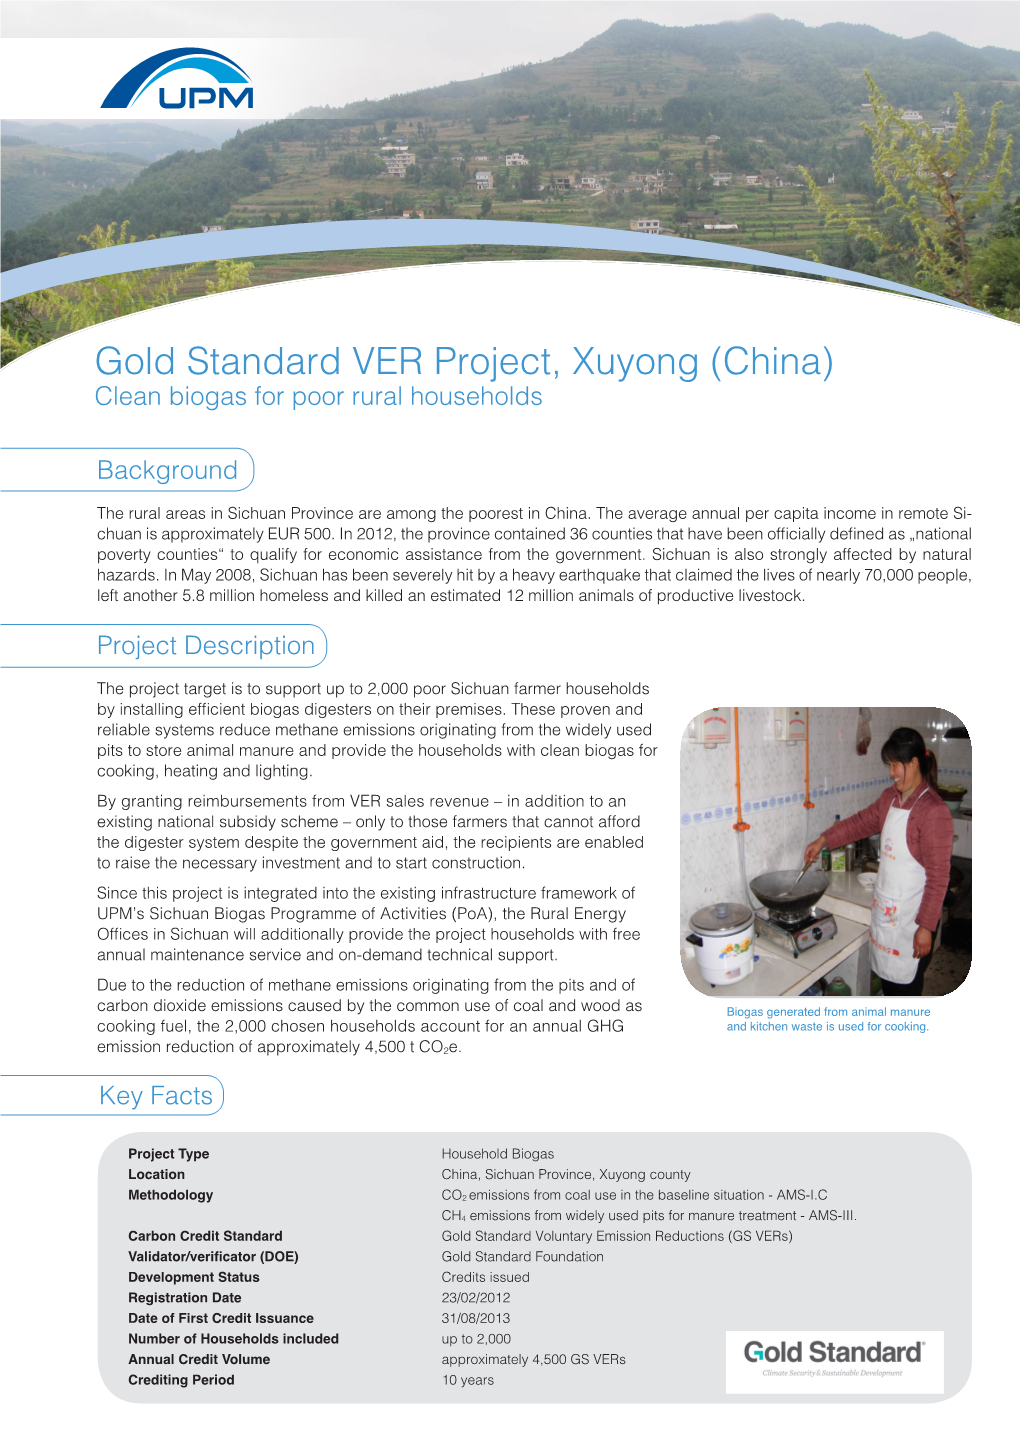 Gold Standard VER Project, Xuyong (China) Clean Biogas for Poor Rural Households